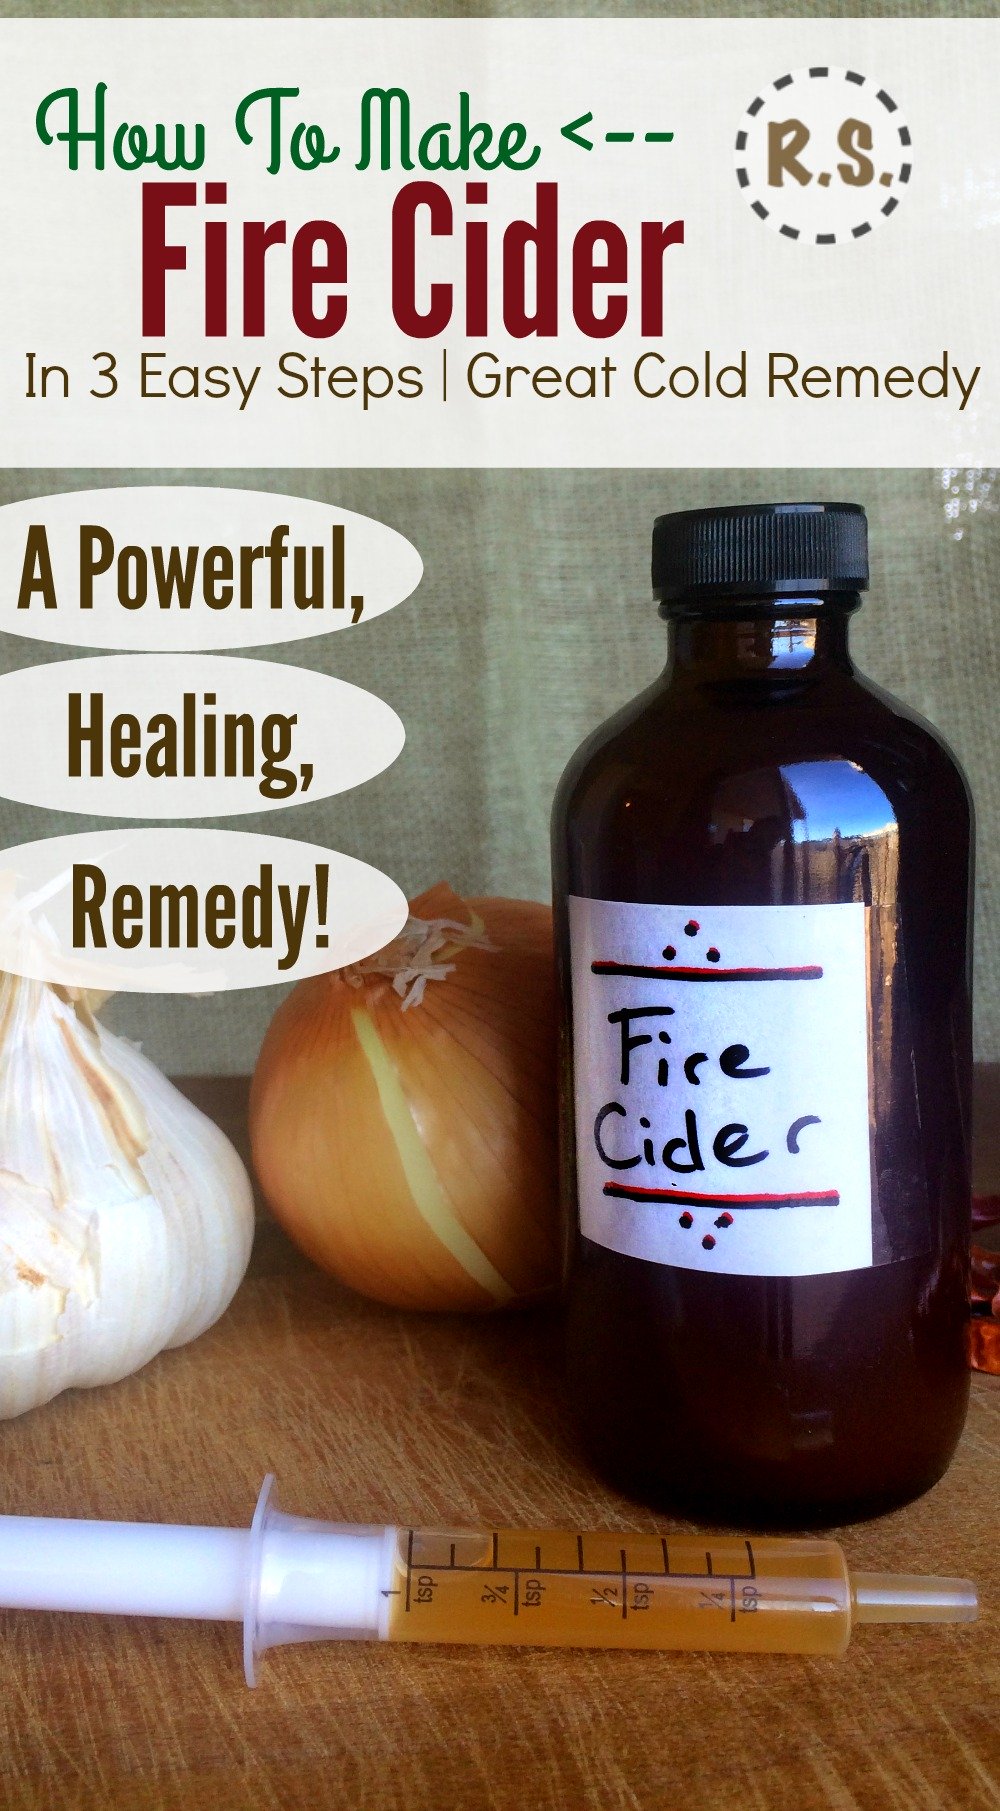 Make a powerful colds and flu remedy with this easy fire cider recipe. Take fire cider at the beginning of symptoms and stop a cold before it starts! An instant fire cider option is included too.